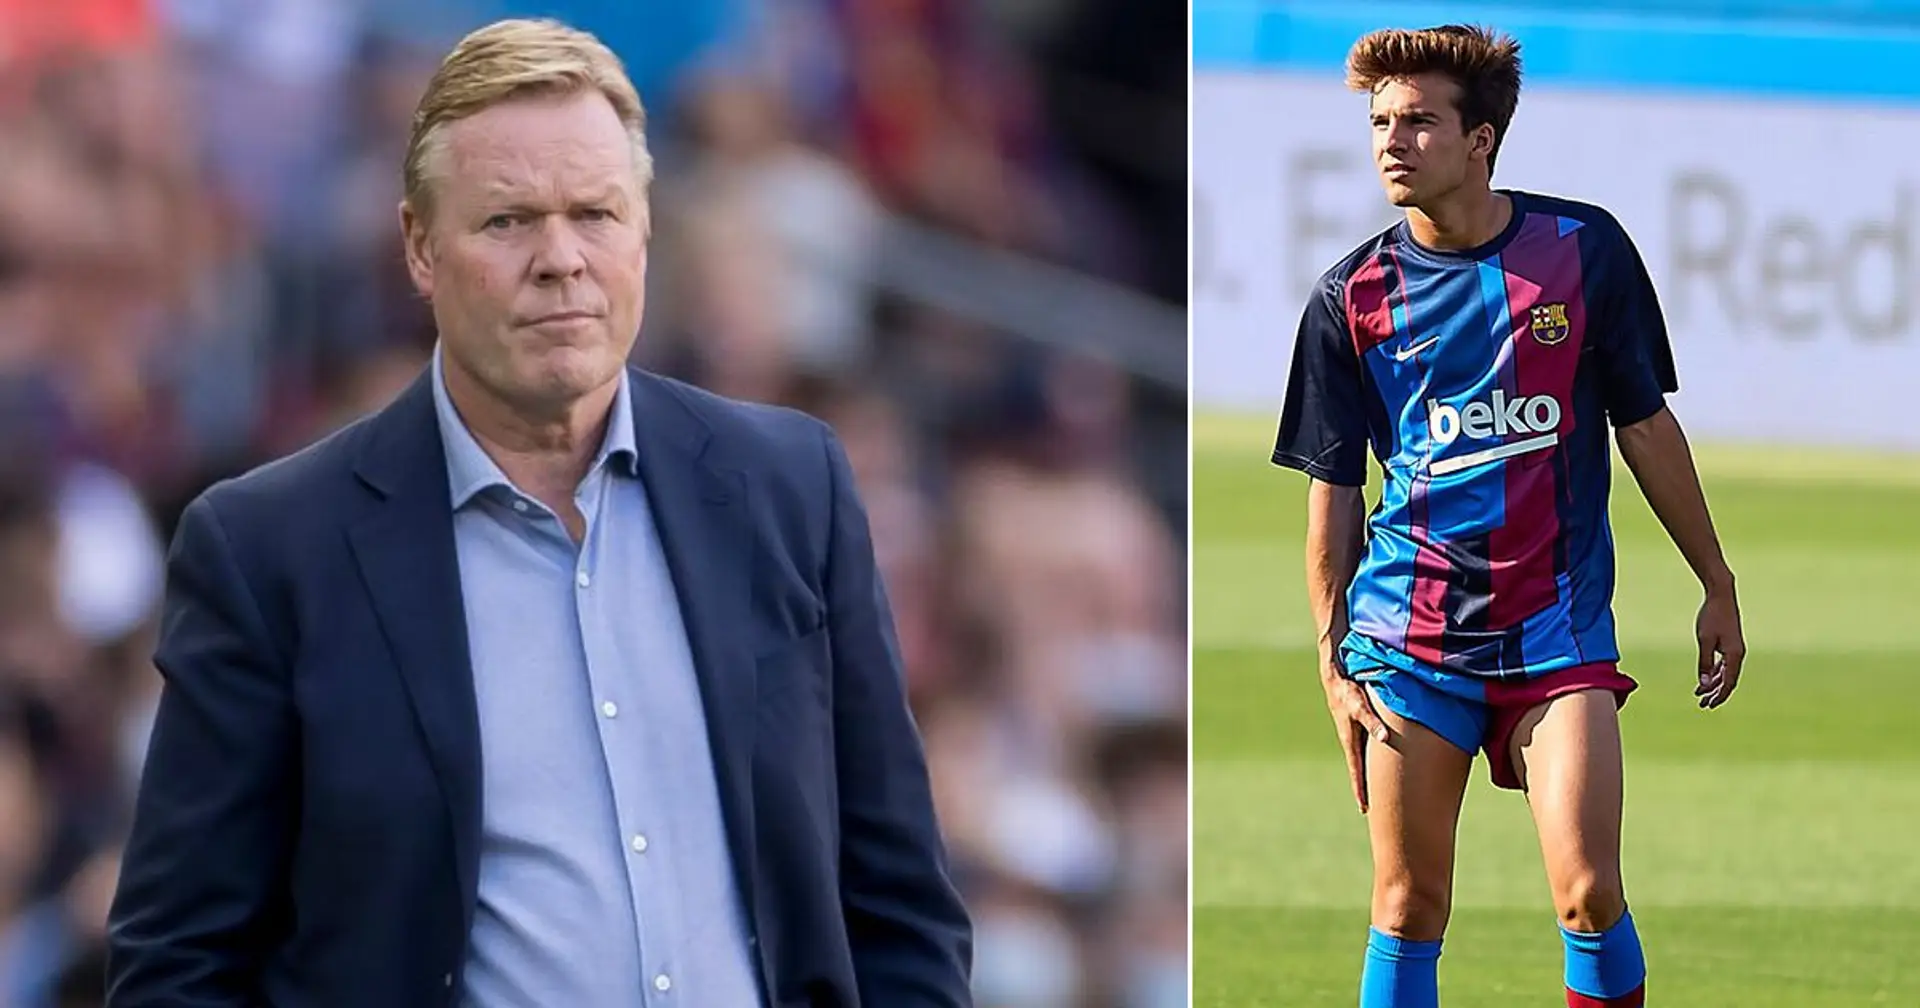 Latest youngster to fall out of favour with Koeman revealed - he's missed 4 straight games